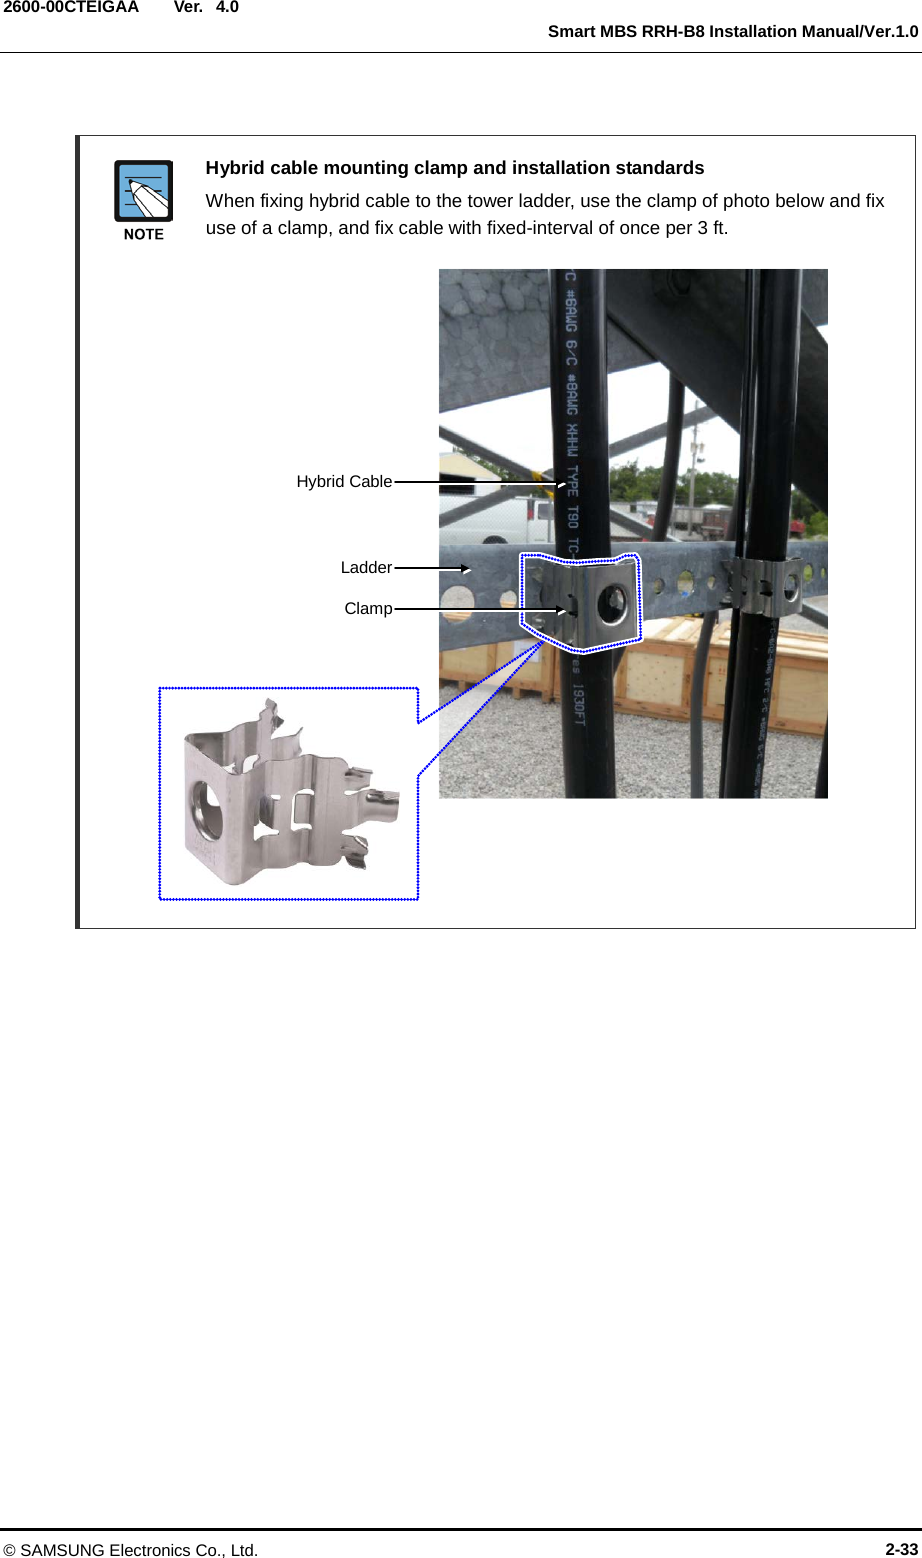  Ver.   Smart MBS RRH-B8 Installation Manual/Ver.1.0 2600-00CTEIGAA 4.0   Hybrid cable mounting clamp and installation standards  When fixing hybrid cable to the tower ladder, use the clamp of photo below and fix use of a clamp, and fix cable with fixed-interval of once per 3 ft.                        Clamp Ladder Hybrid Cable  © SAMSUNG Electronics Co., Ltd. 2-33 